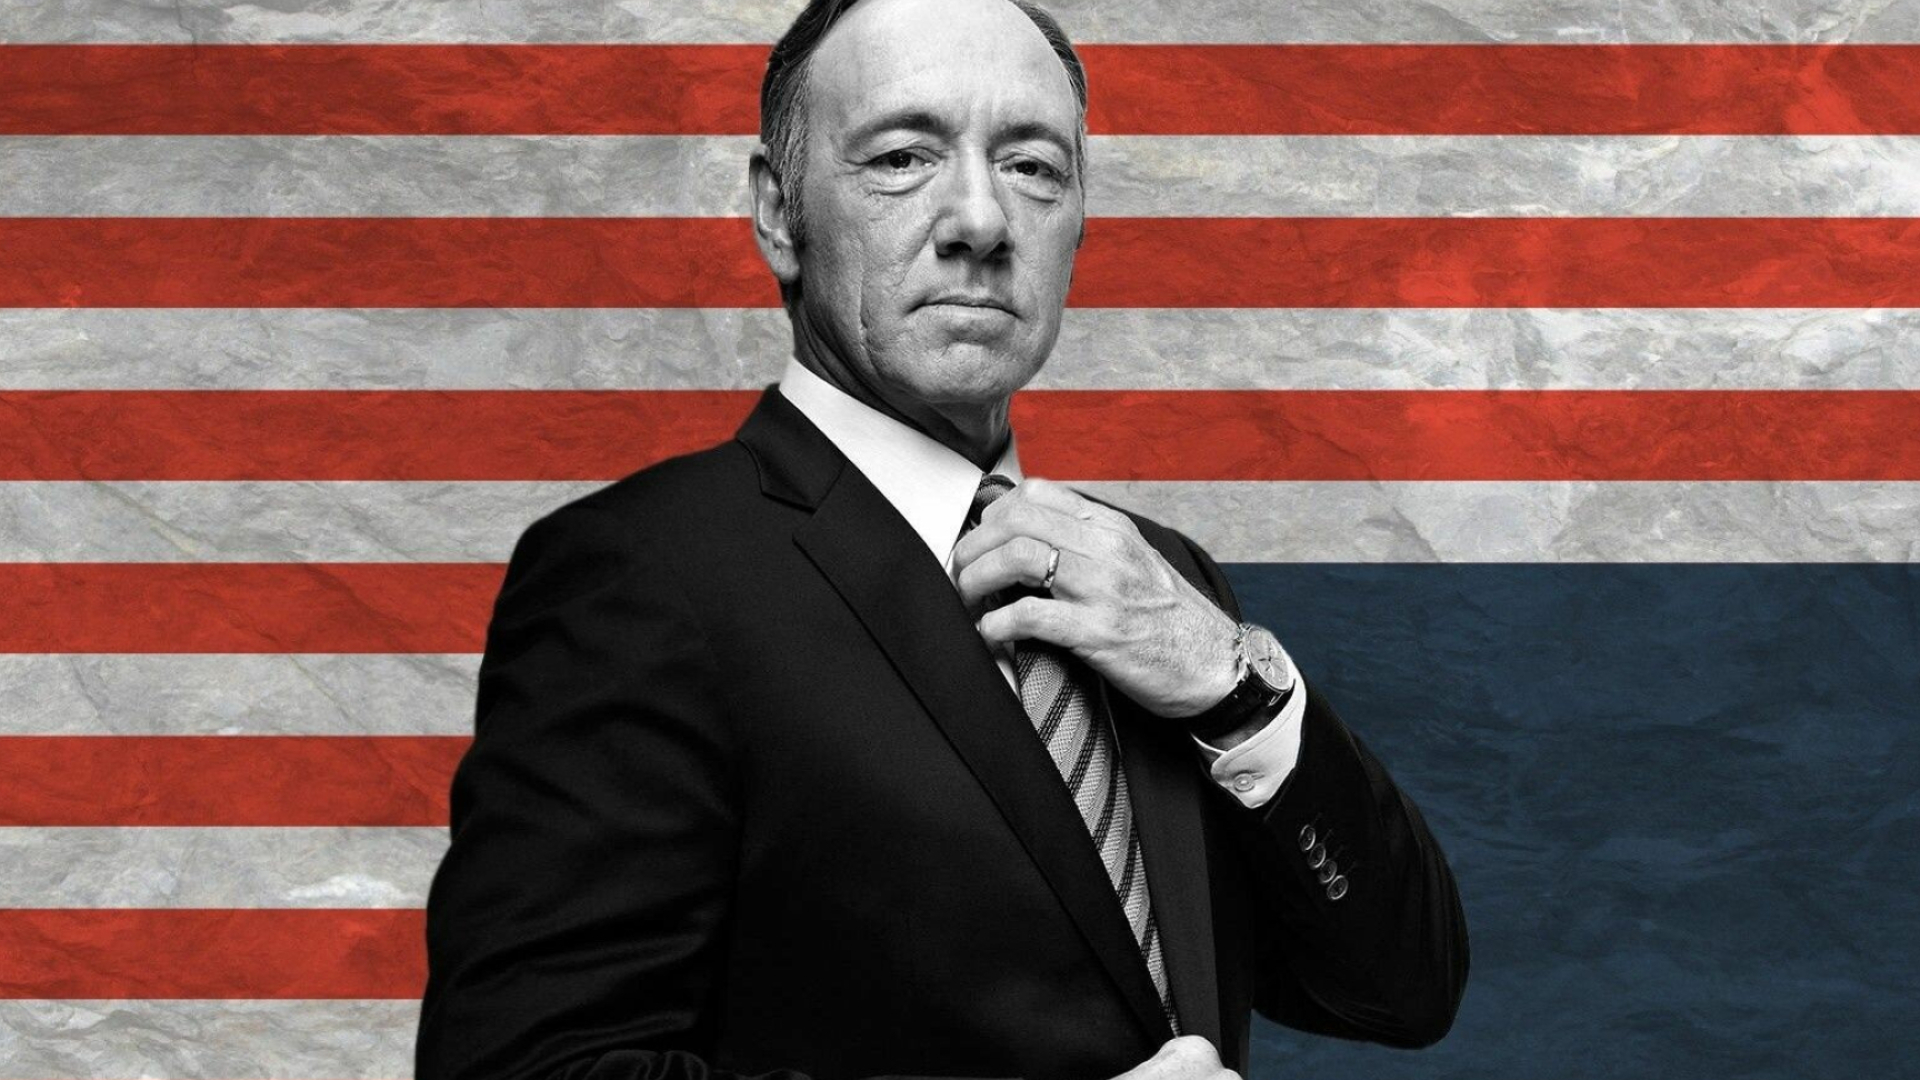 House of Cards: Kevin Spacey won The Golden Globe Award for Best Actor – Television Series Drama in 2015. 1920x1080 Full HD Background.